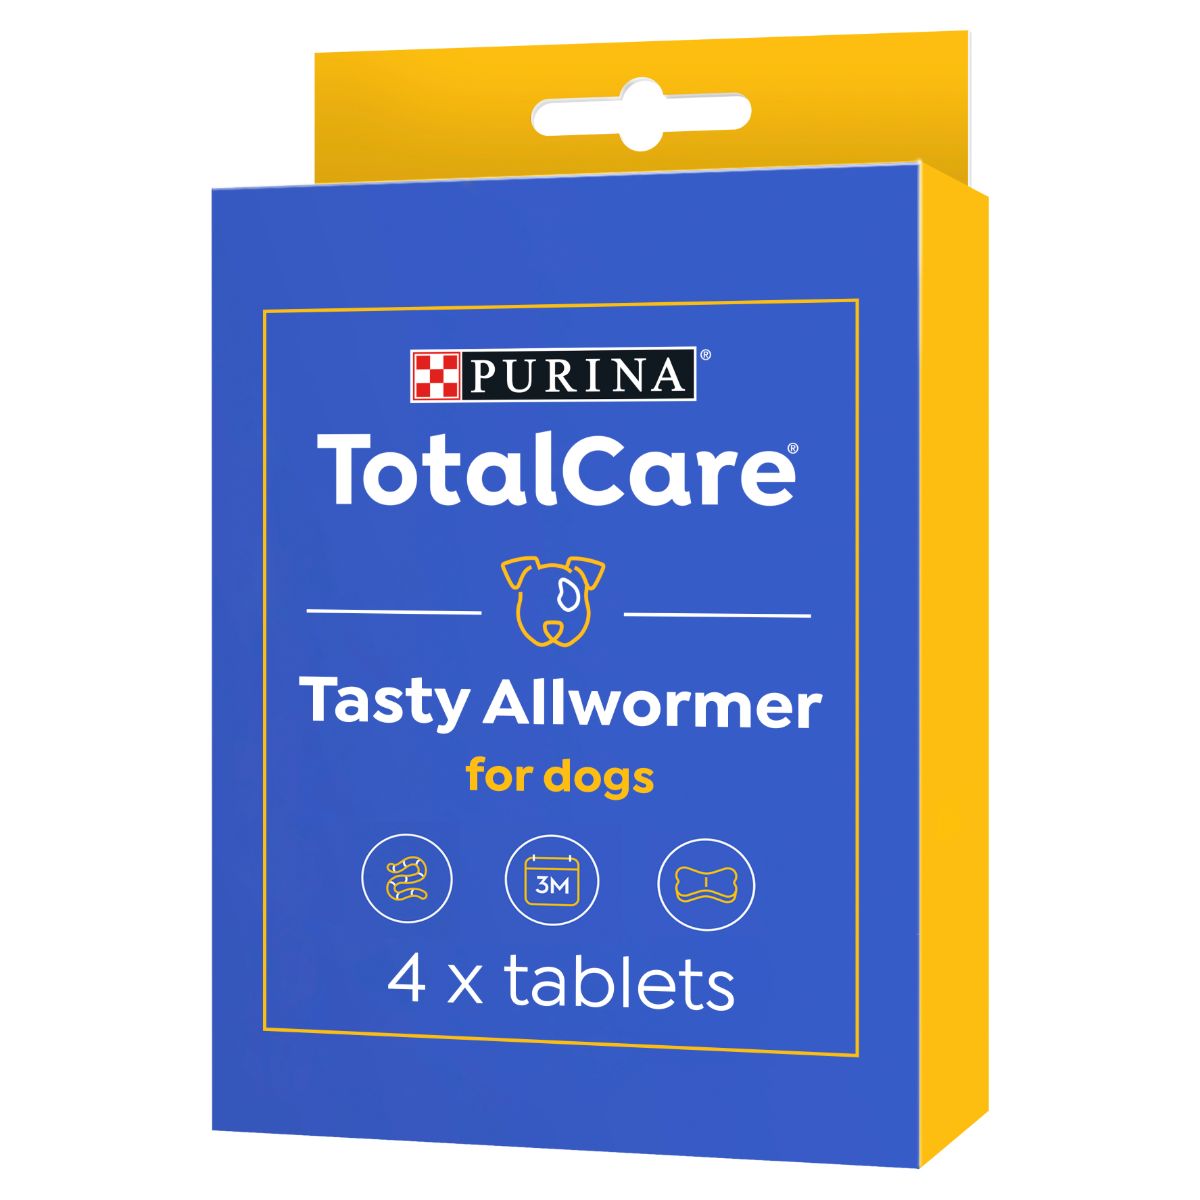 Purina Total Care Tasty Allwormer For Dogs 4 Tablets (100000053076) [default_color]